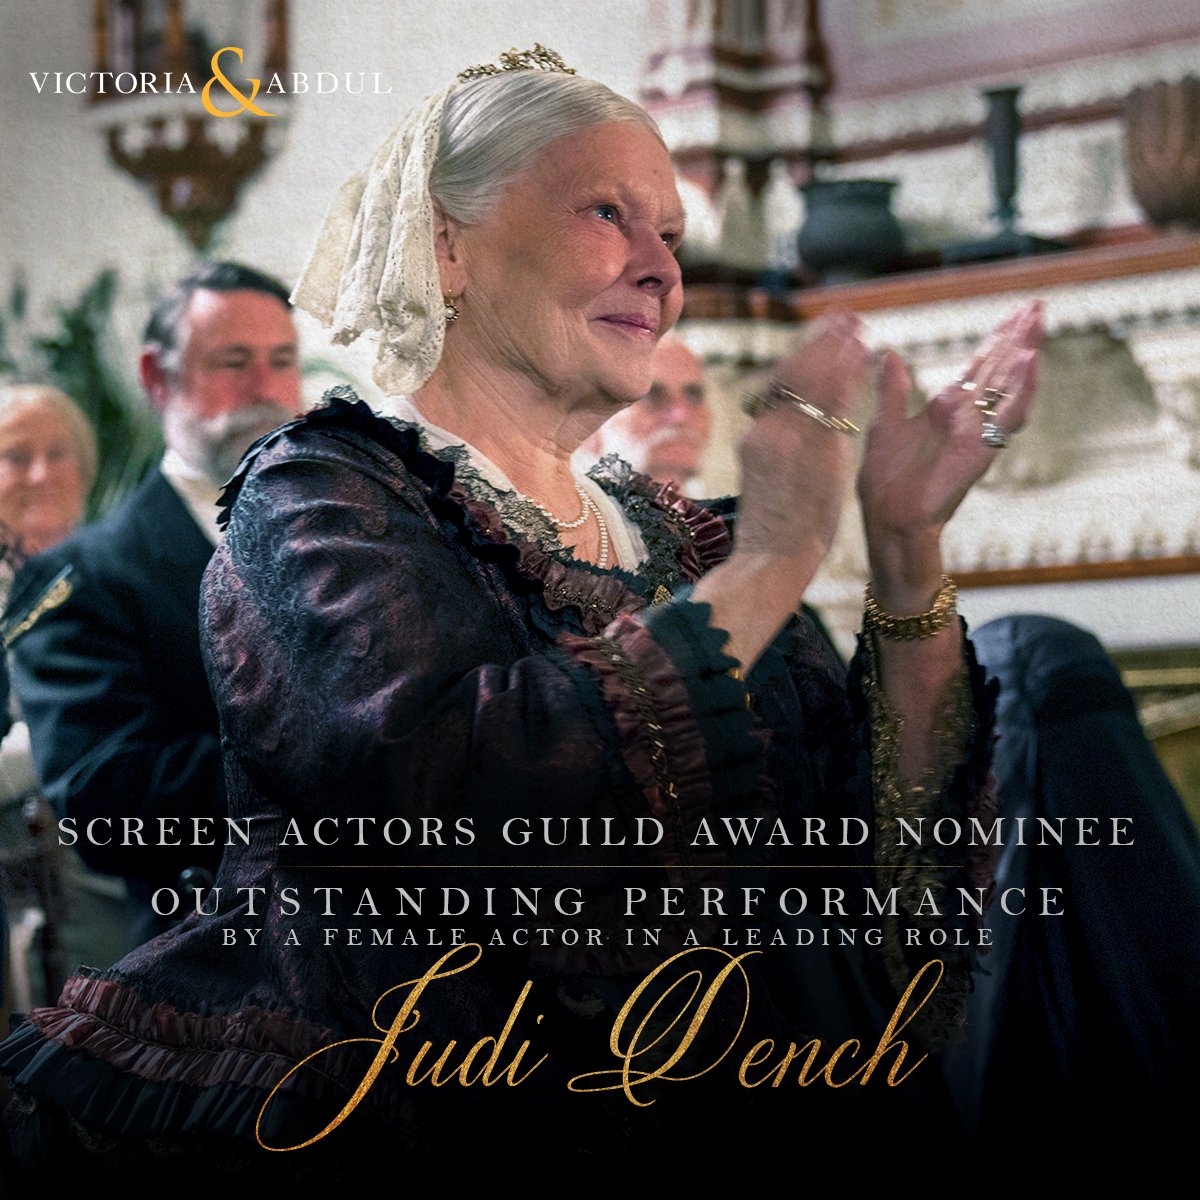 A huge congrats to Judi Dench on her @SAGawards nomination for Female Actor in a Leading Role! #VictoriaAndAbdul